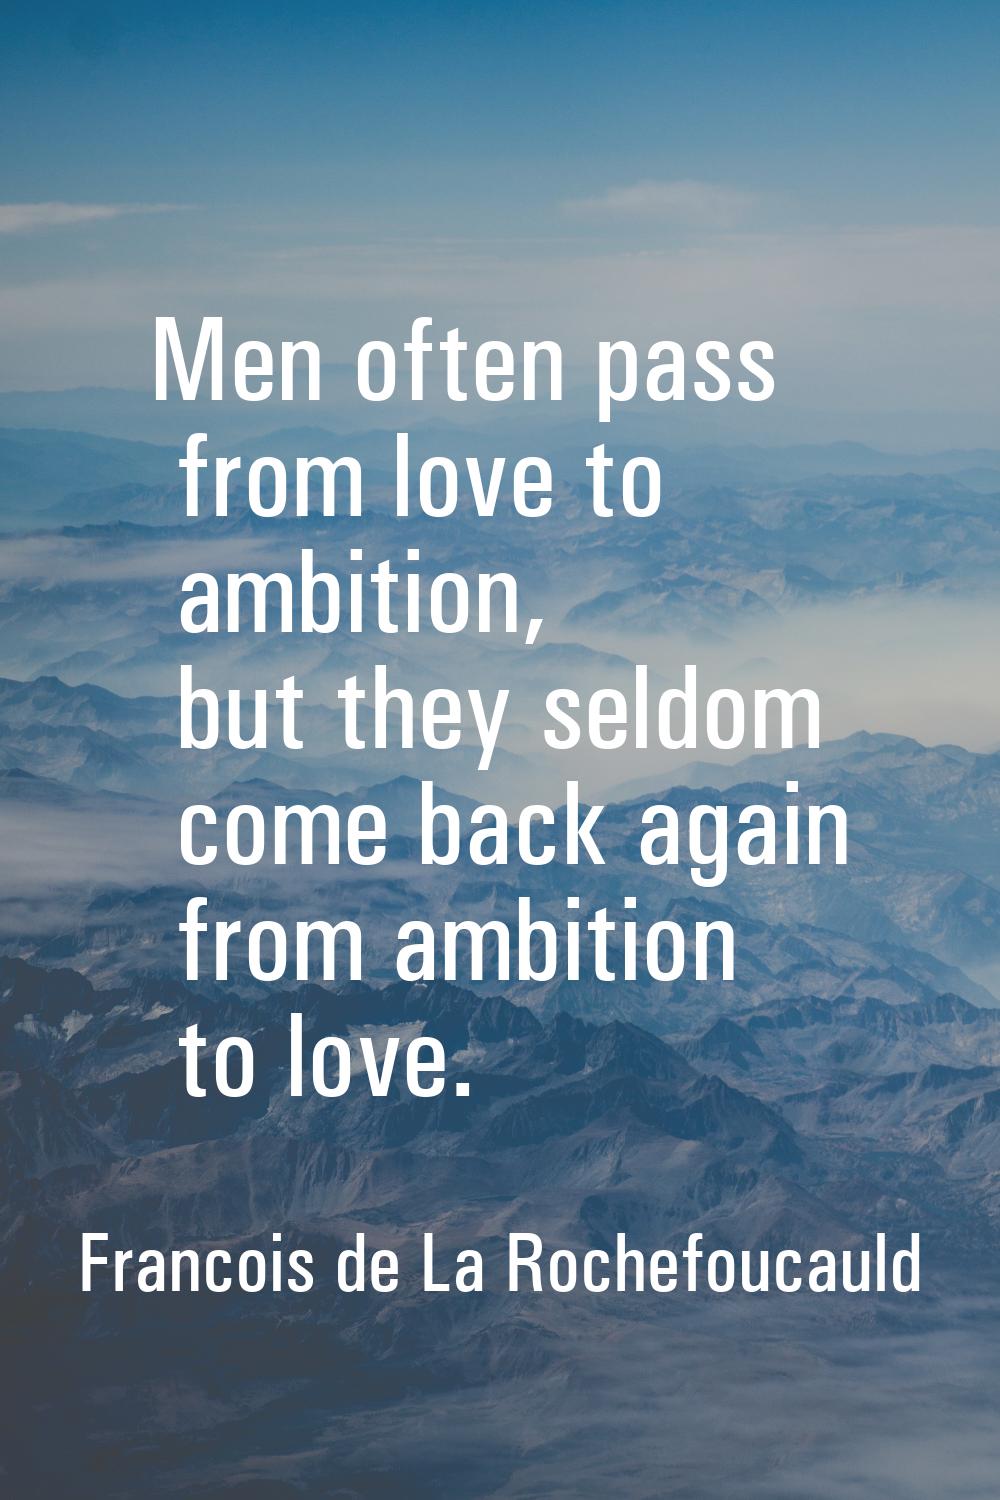 Men often pass from love to ambition, but they seldom come back again from ambition to love.